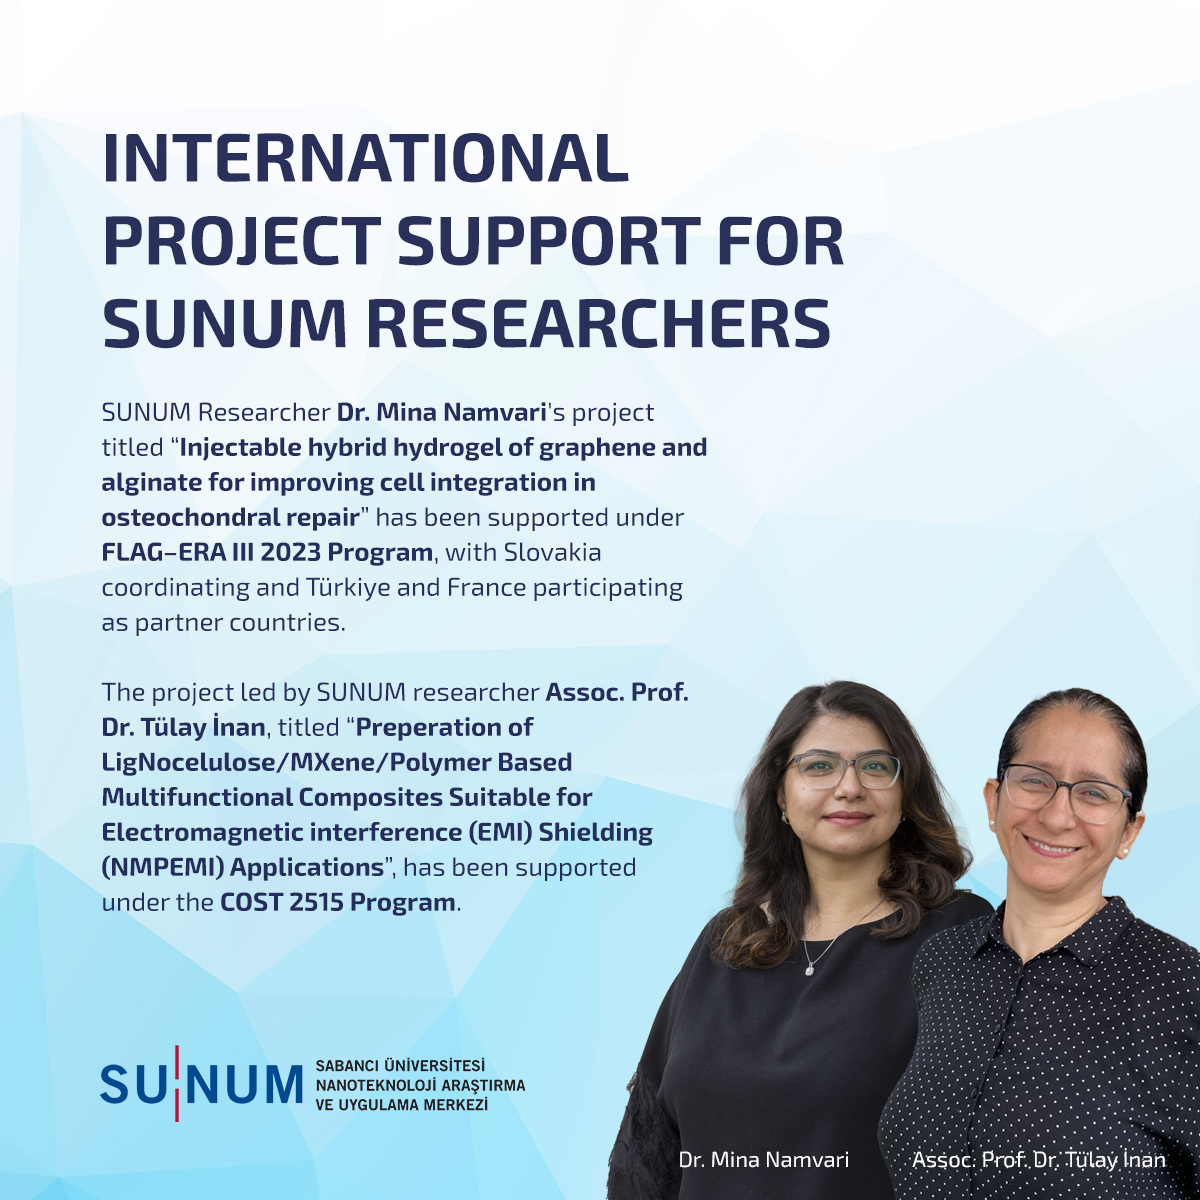 International Project Support for SUNUM Researchers